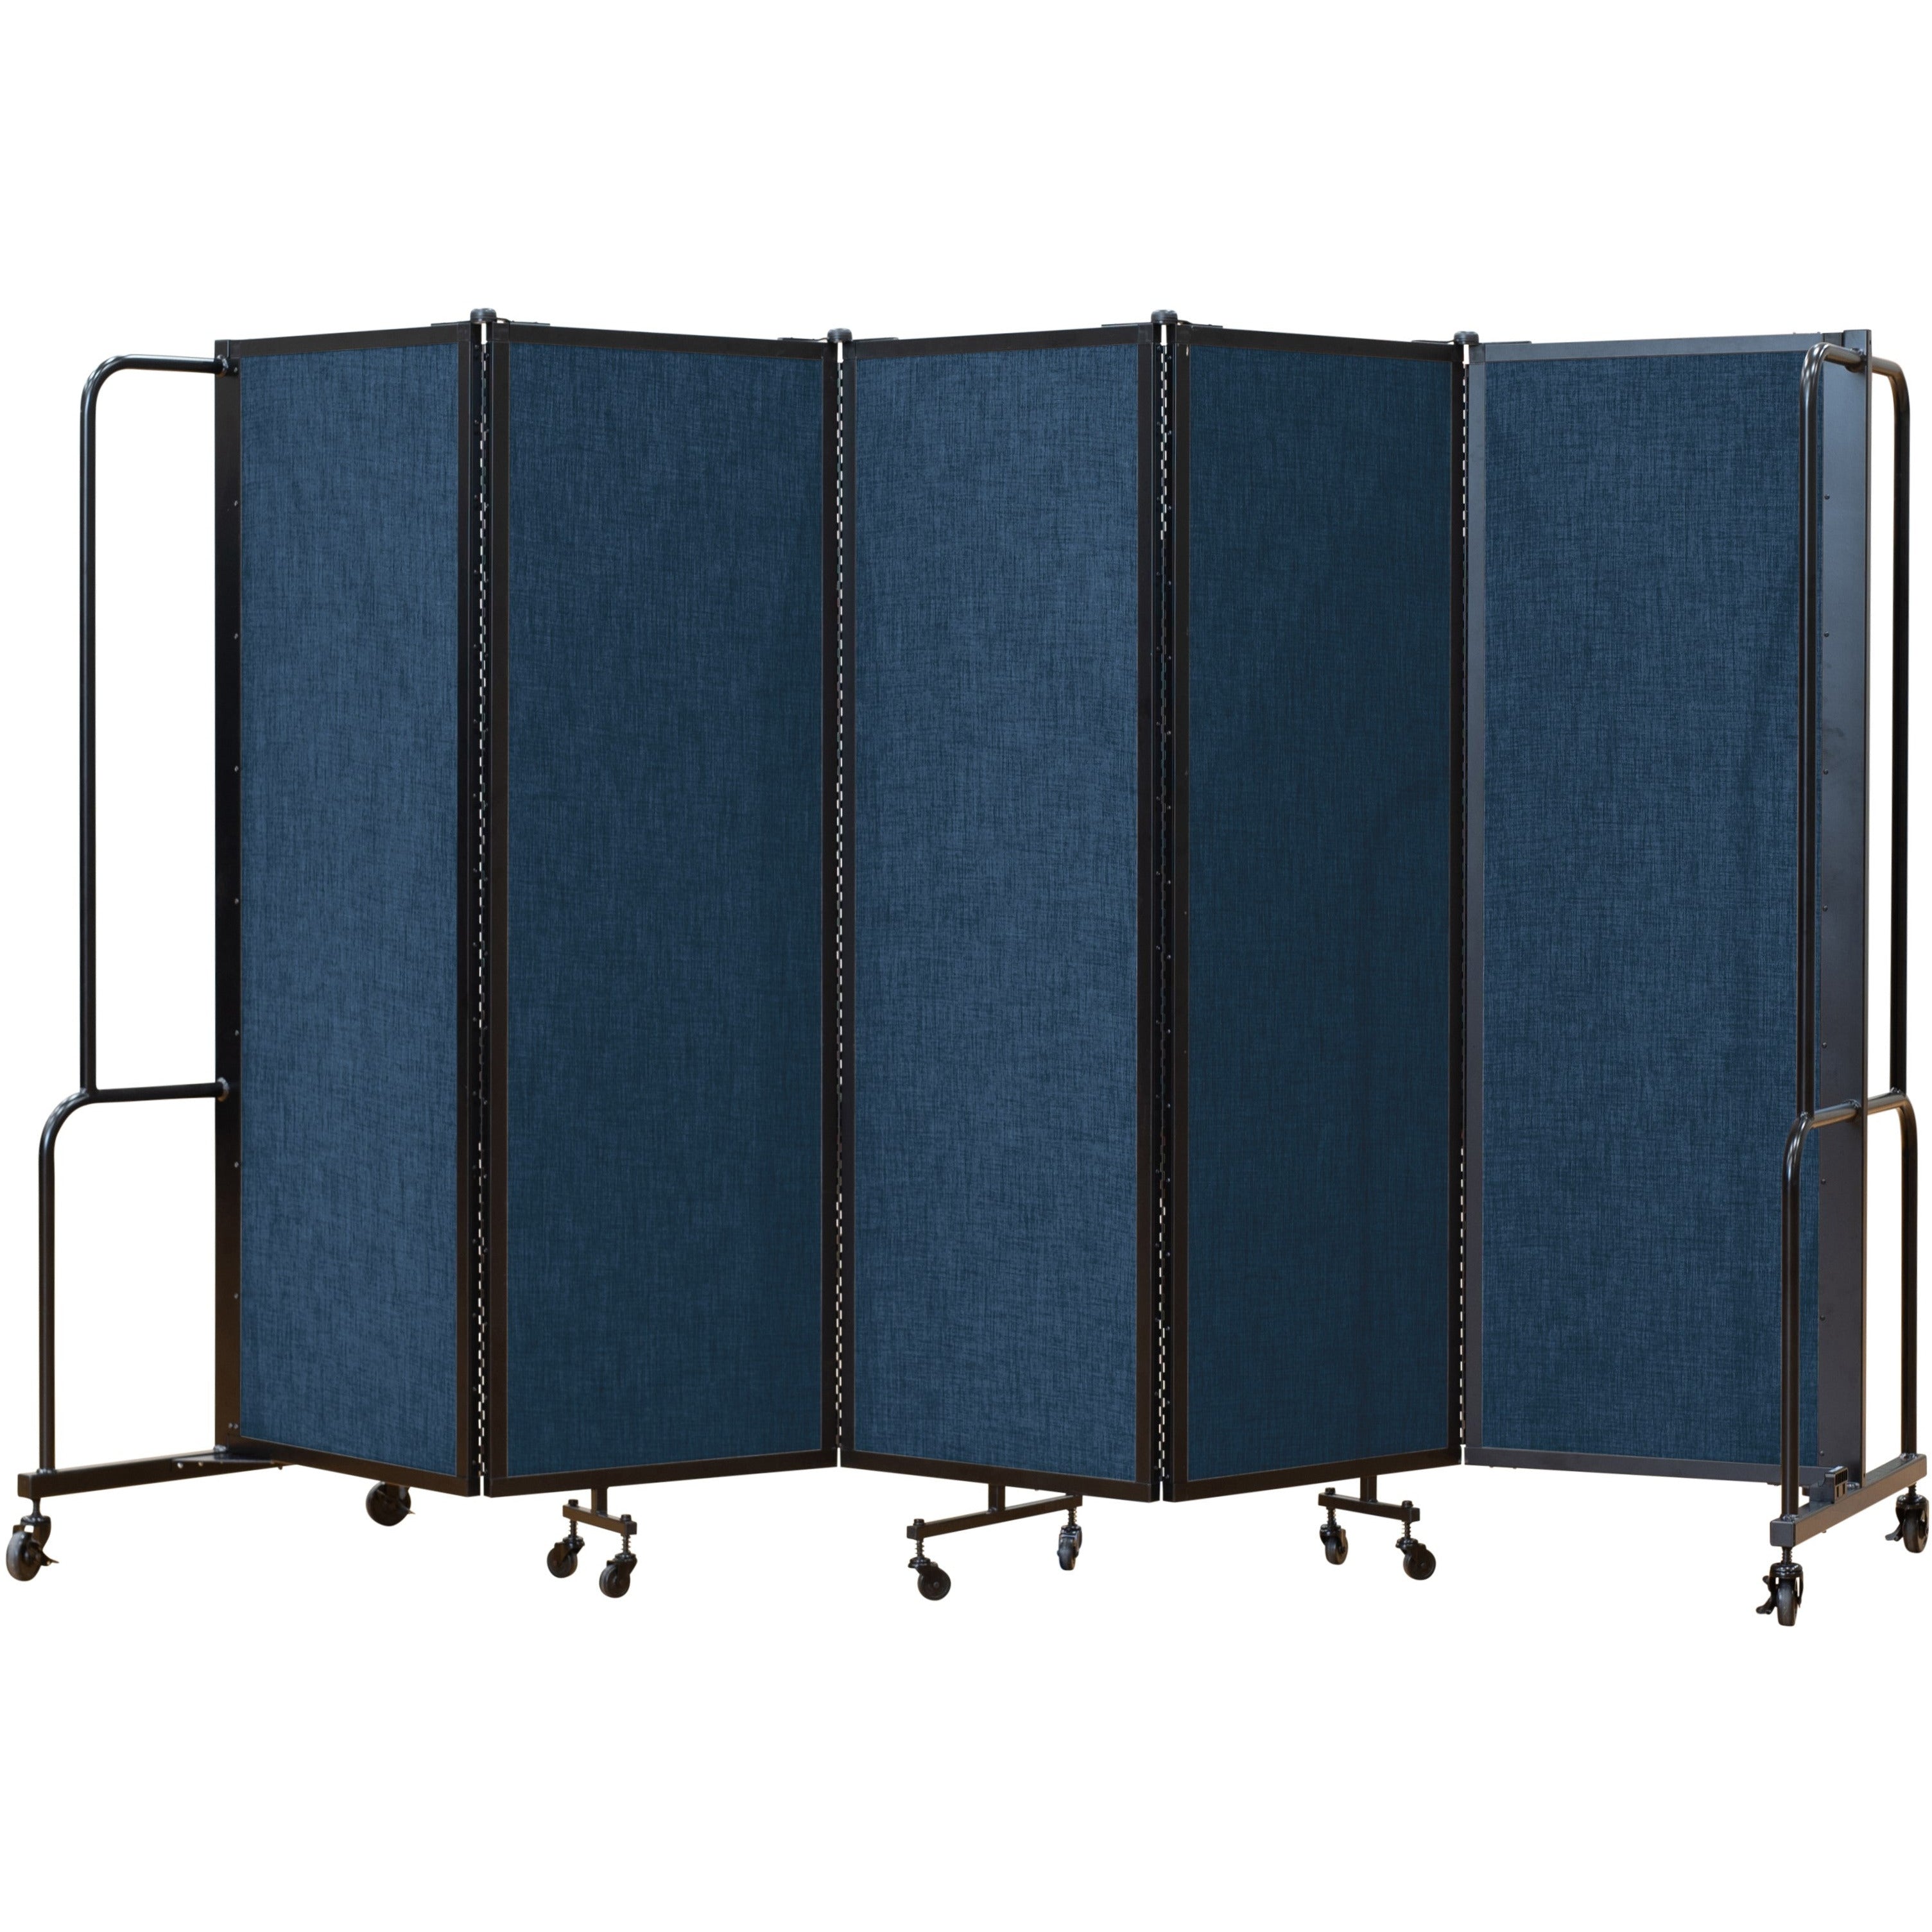 NPS® Room Divider, 6' Height, 5 Sections, Blue